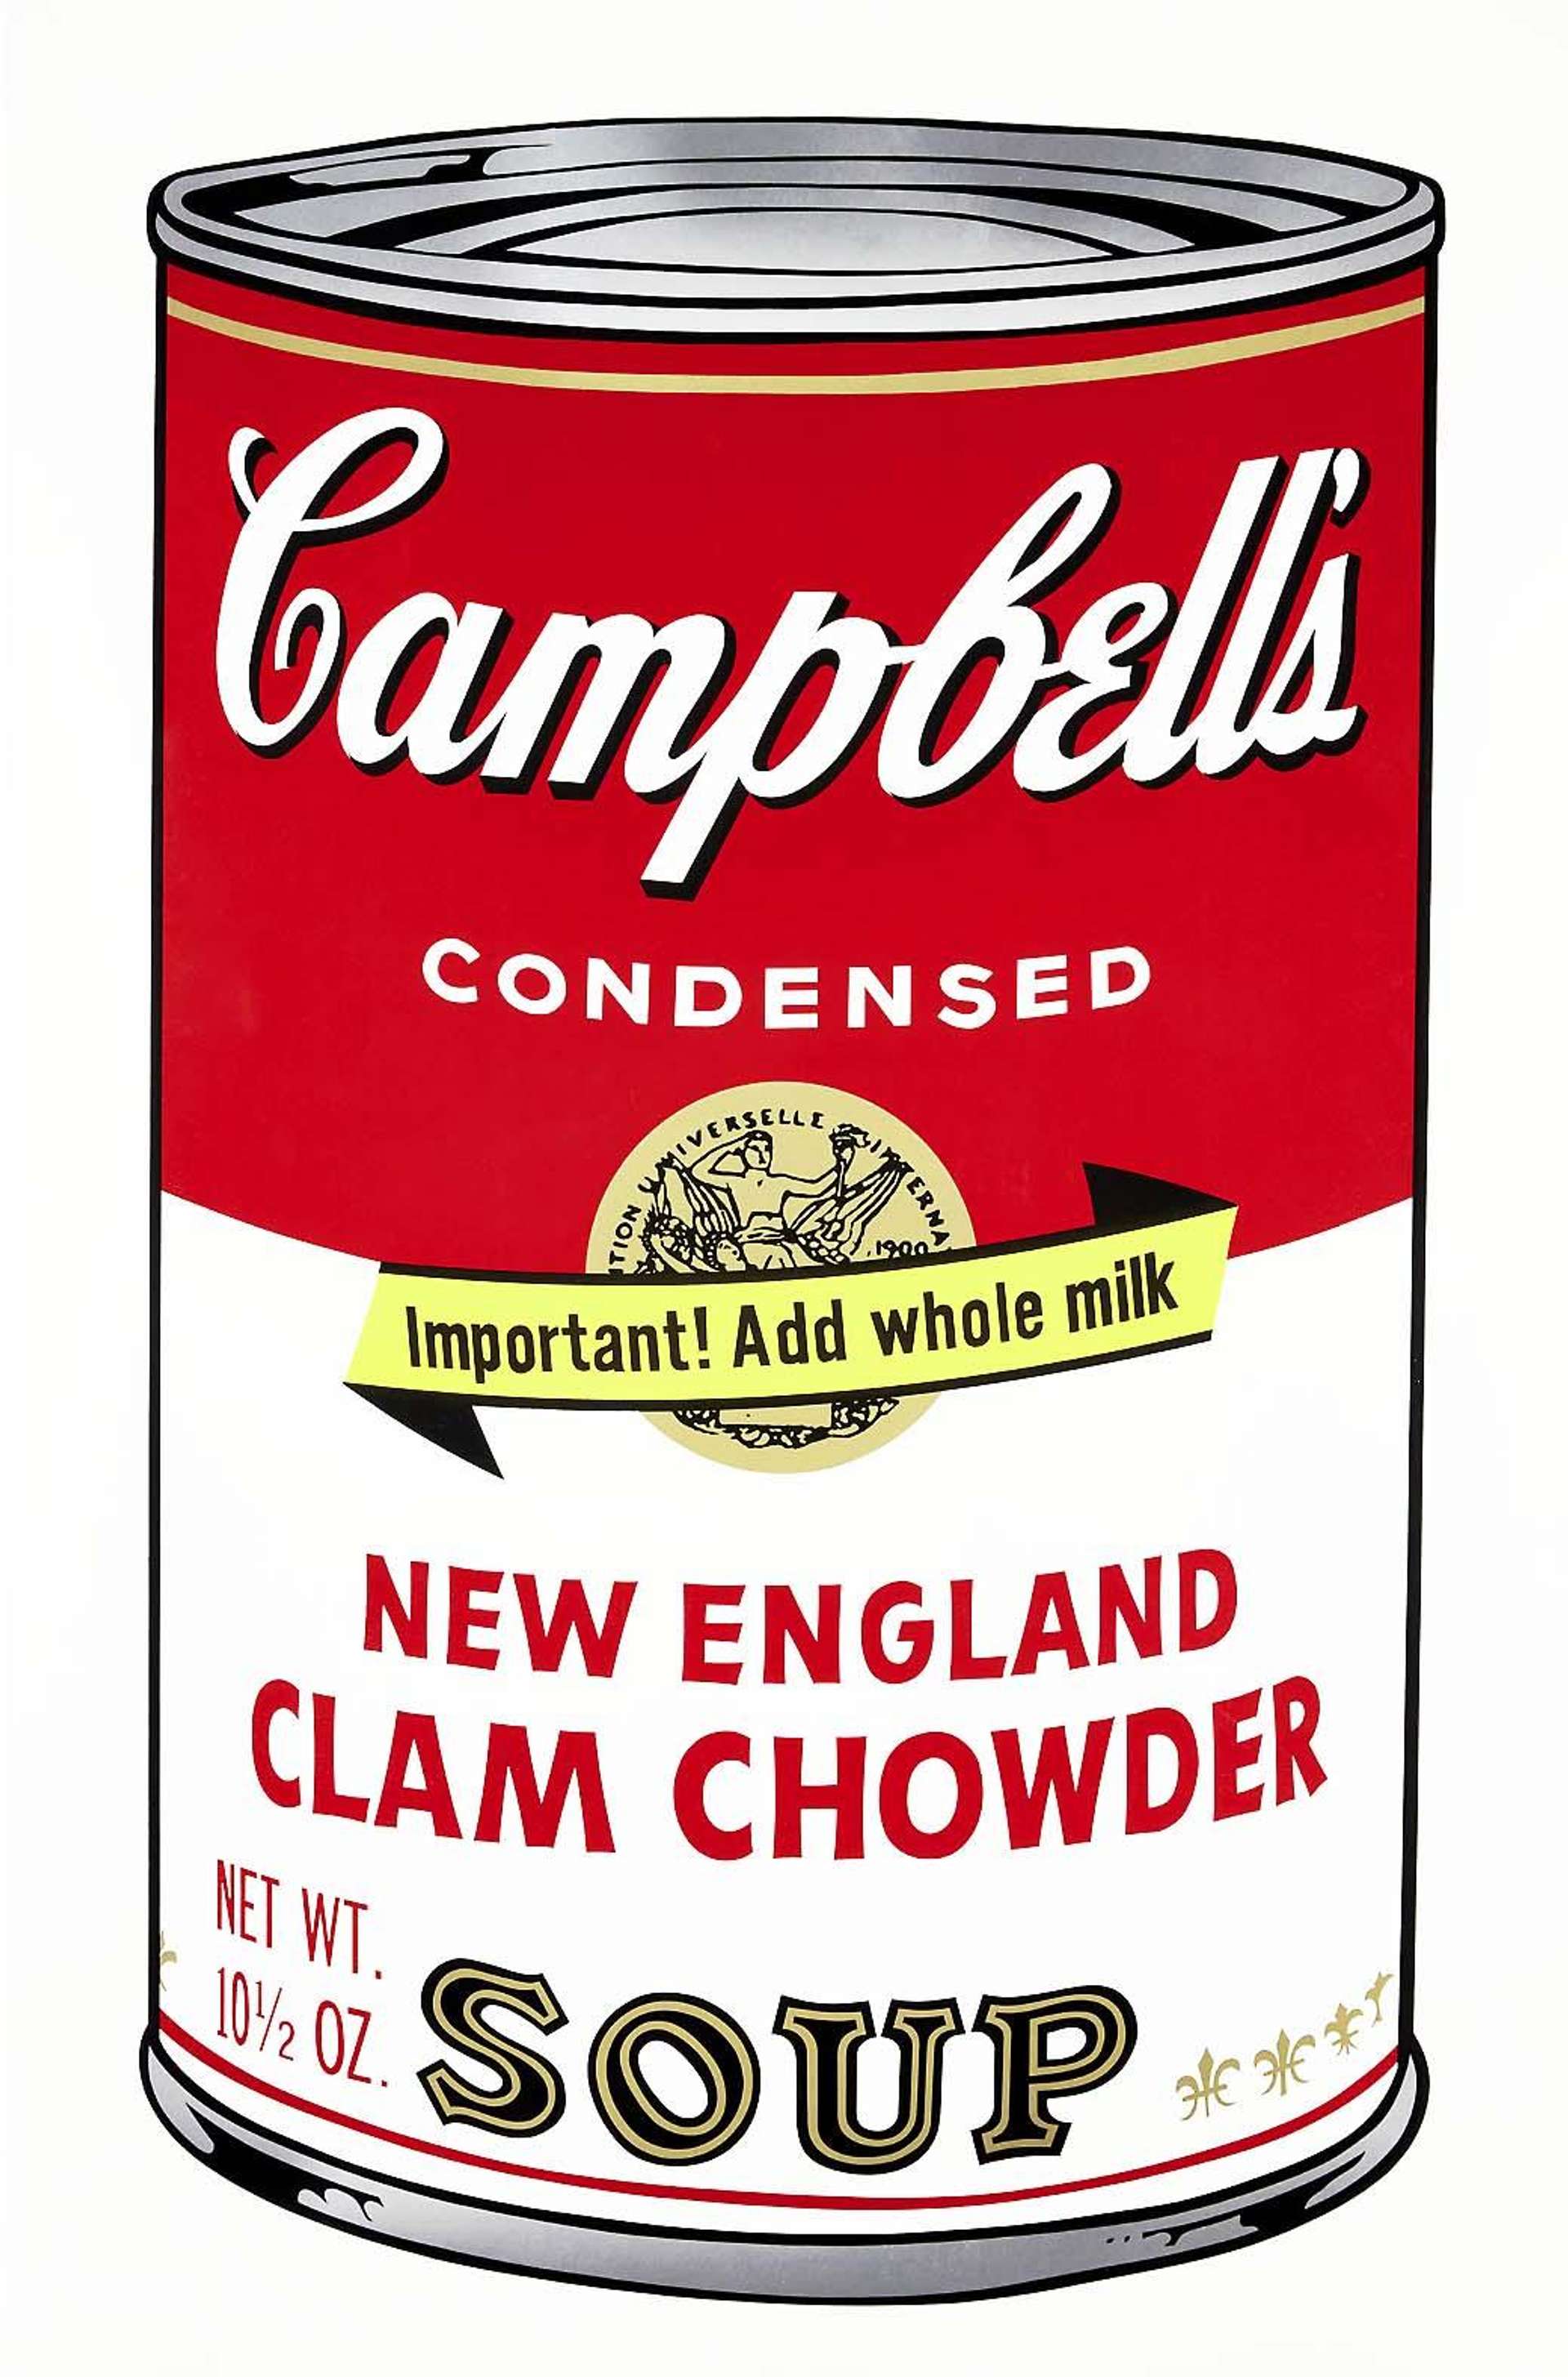 Andy Warhol’s Campbell's Soup II, New England Clam Chowder (F. & S. II.57). A can of Campbell’s clam chowder soup in the style of Pop Art.